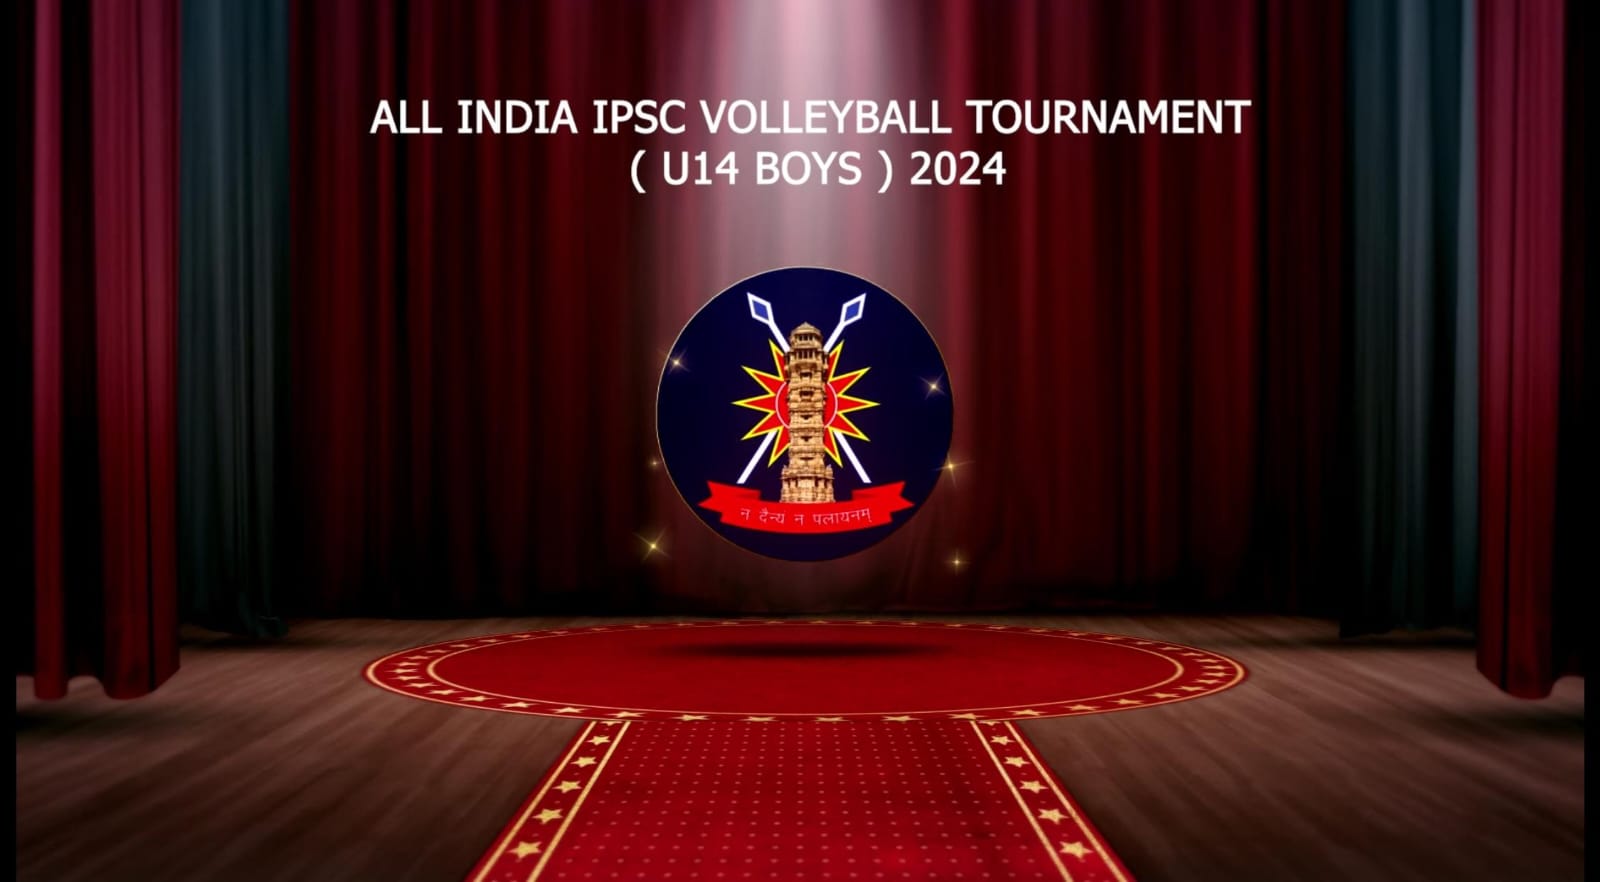 IPSC U 14 Volleyball Tournament from 14 -16 May